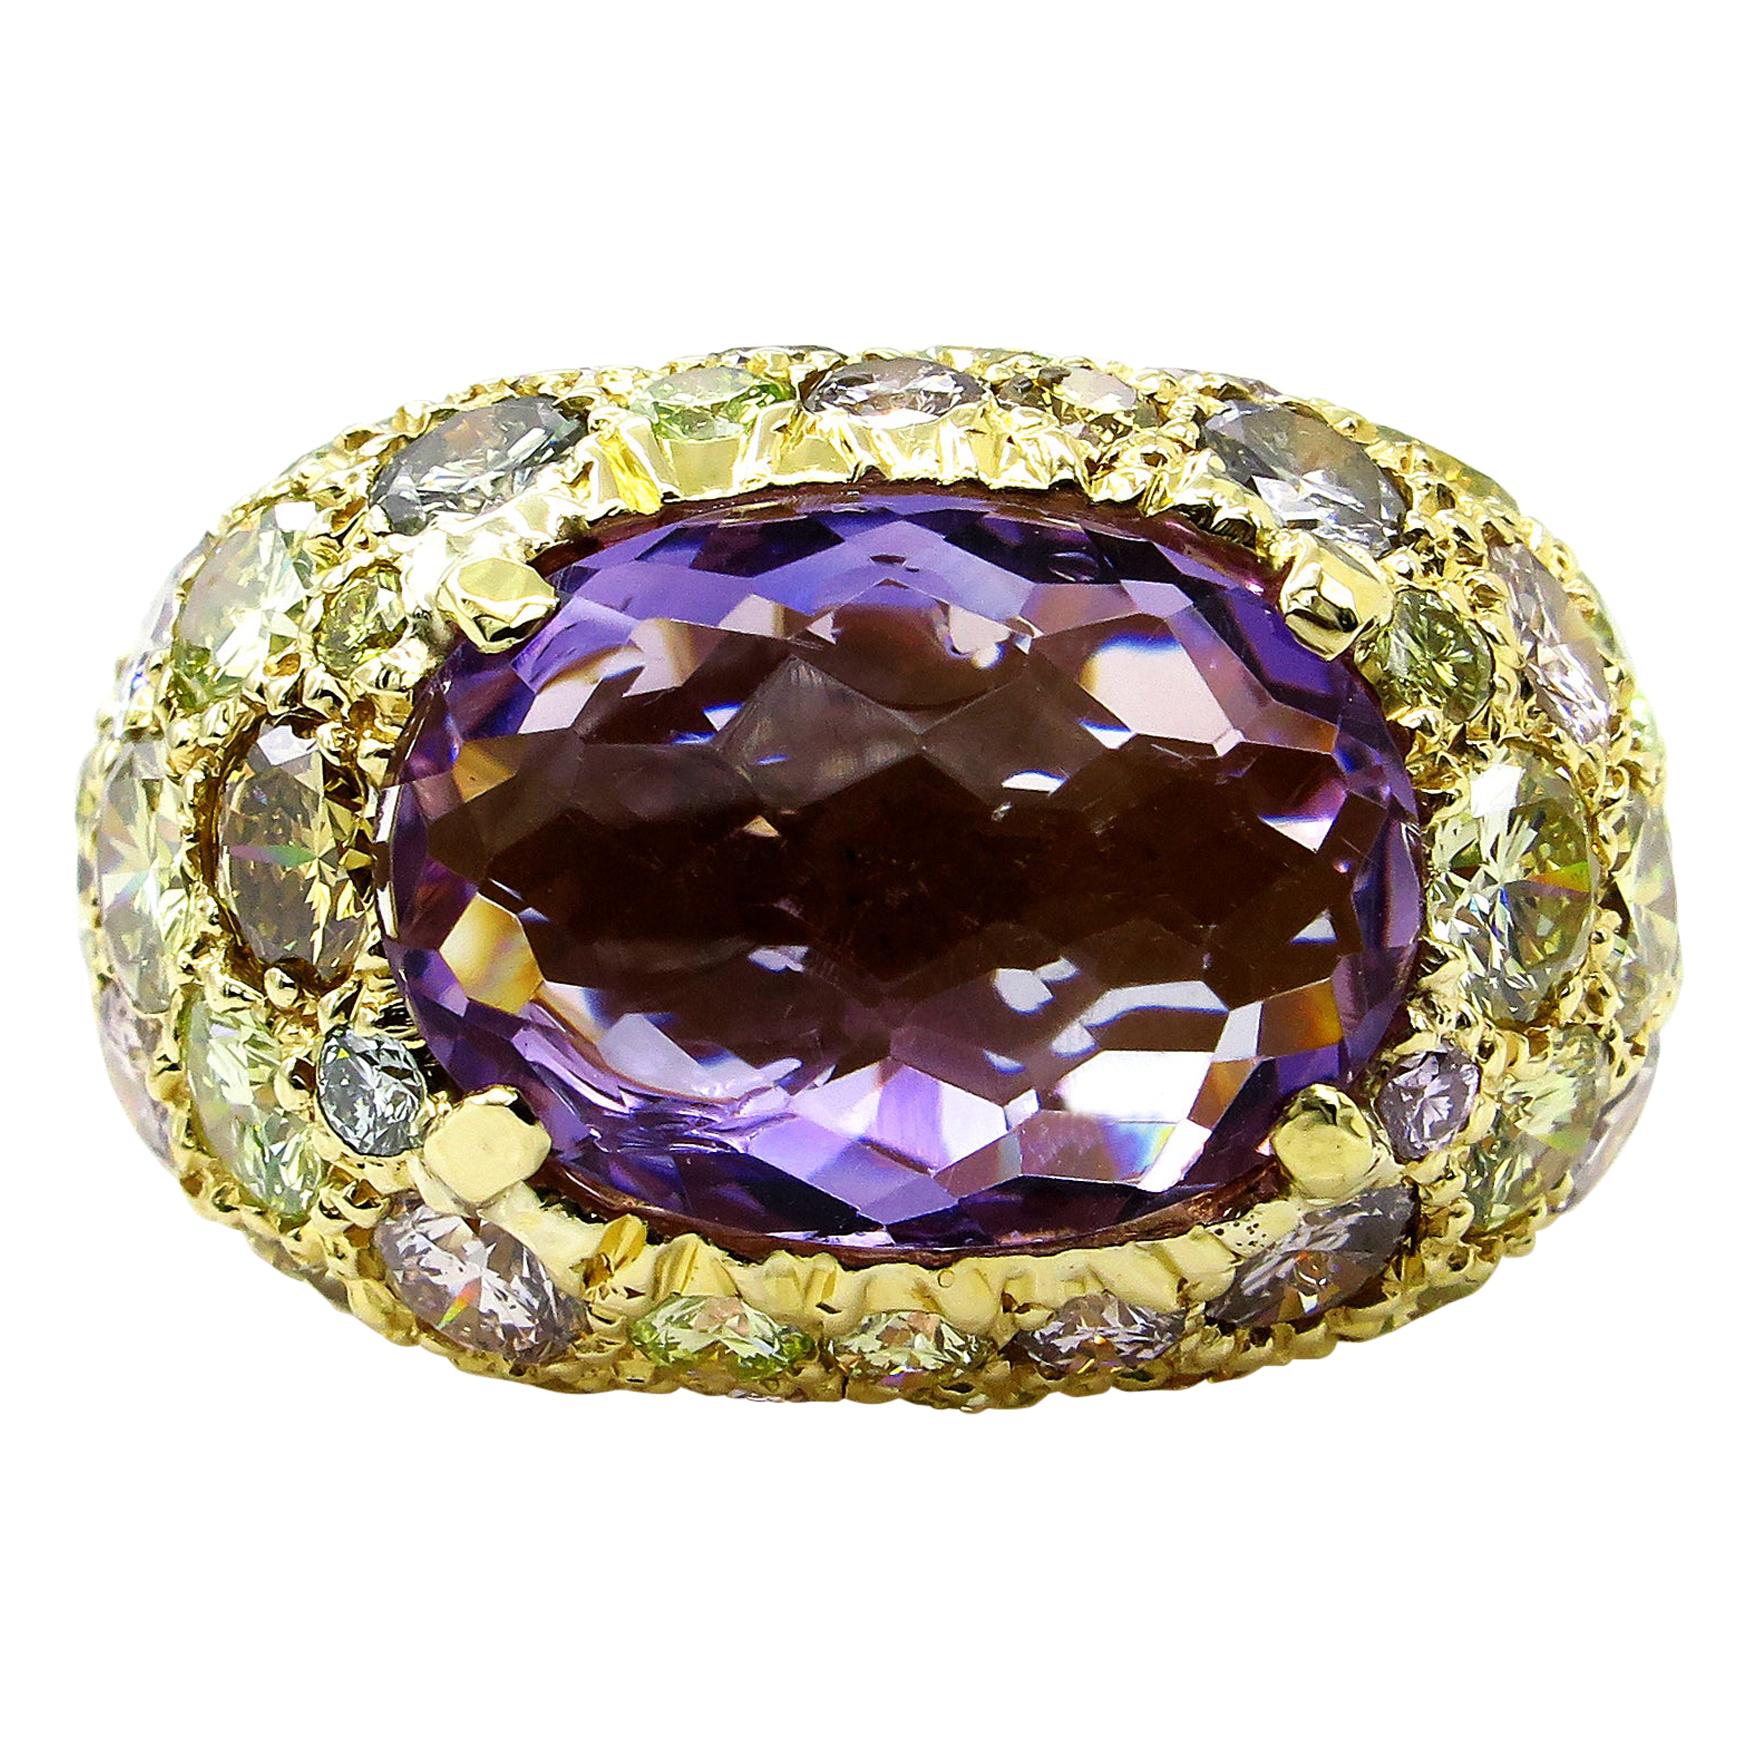 10.68 Carat Natural Fancy Multicolored Diamonds & Amethyst Dome 18k Gold Ring